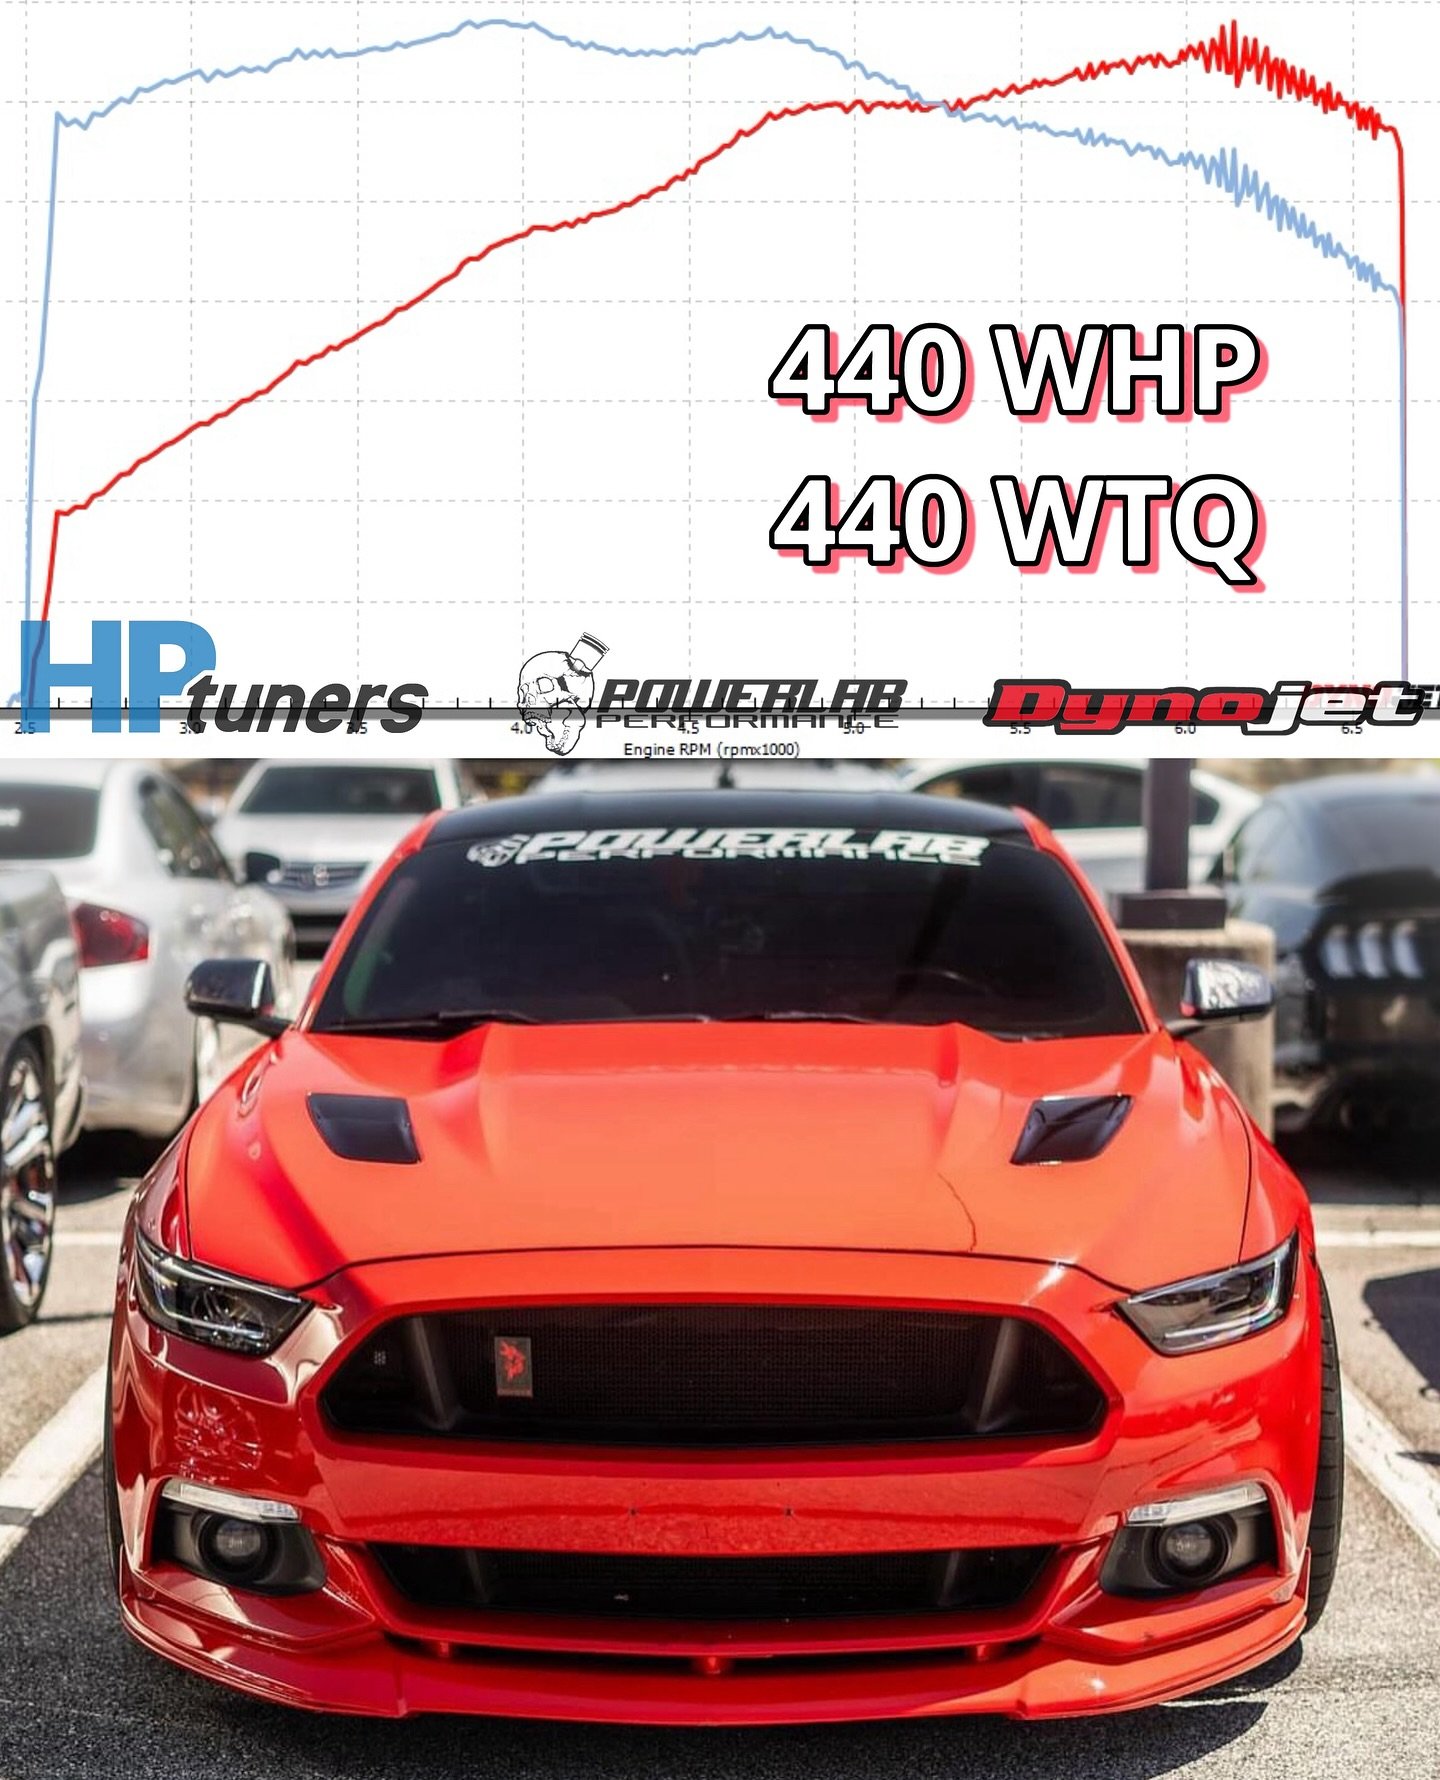 Another 440+ NA GEN-2 📈
 
INTAKE / EXHAUST / LU47 / E85 🌽
 
Remote Tuning From $199 | Dyno Tuning From $499
 
 
🟡 Late-Model Ford Performance
🟡 Dyno &amp; Remote Tuning
🟡 Performance Parts
🟢 Financing Available
🔴 Email For Support | No DMs
 
-